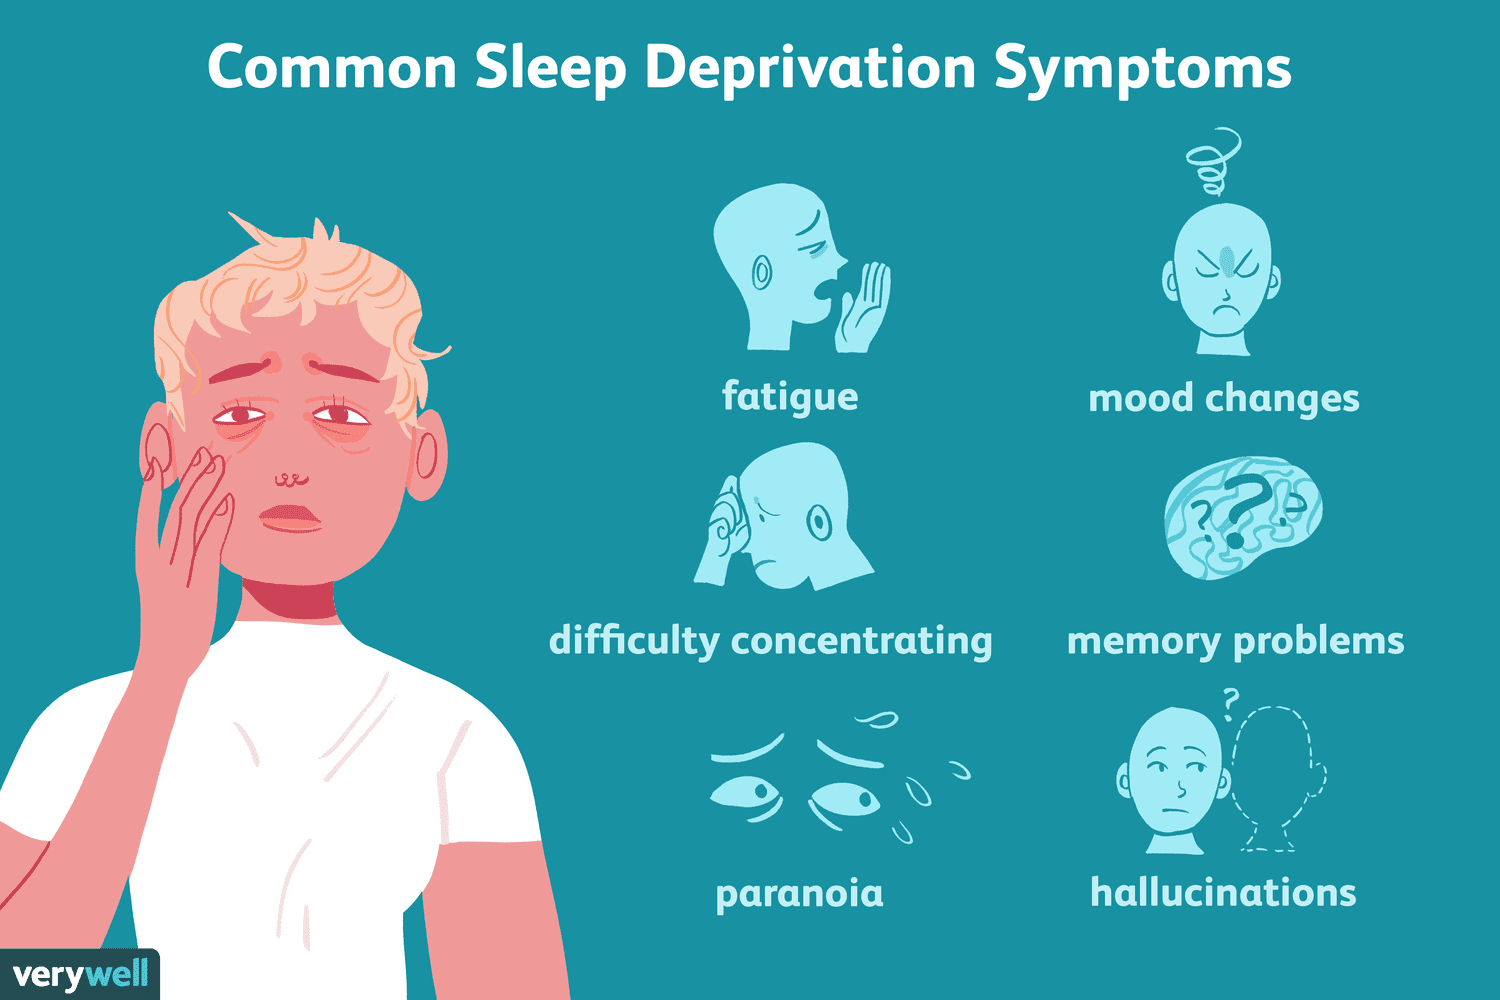 What are the common signs of sleep deprivation, particularly regarding deep sleep?